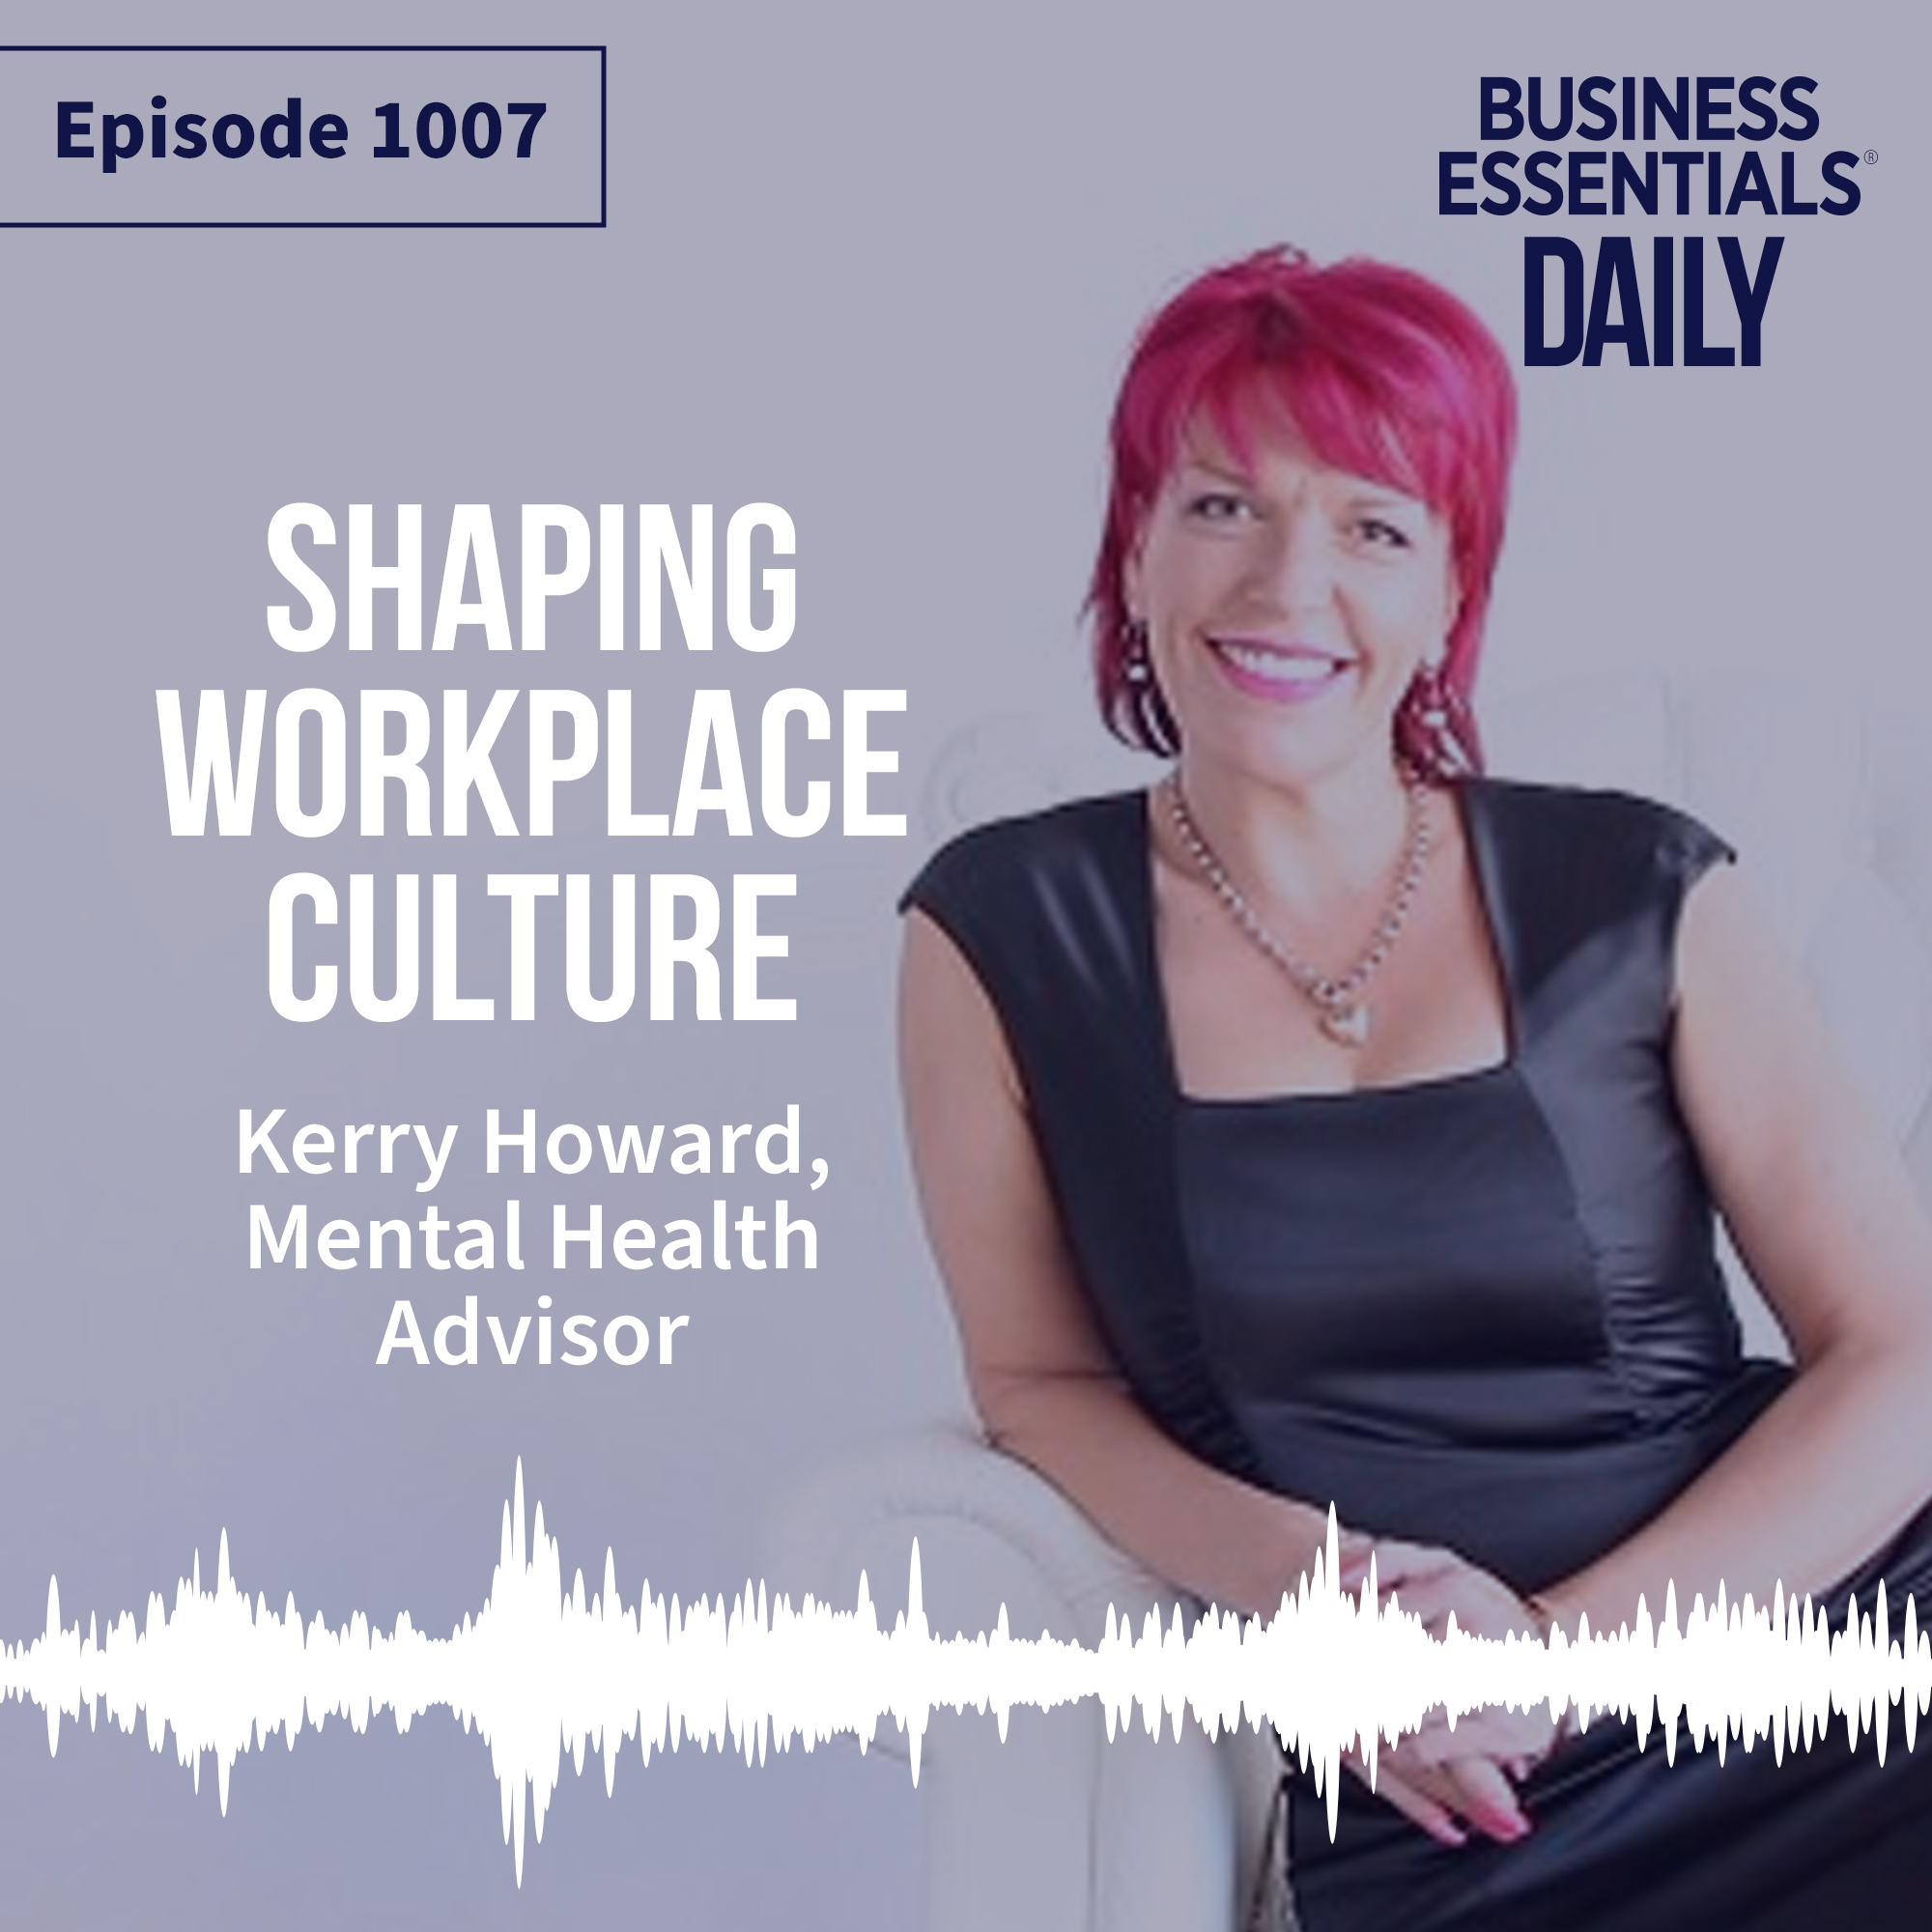 Shaping workplace culture